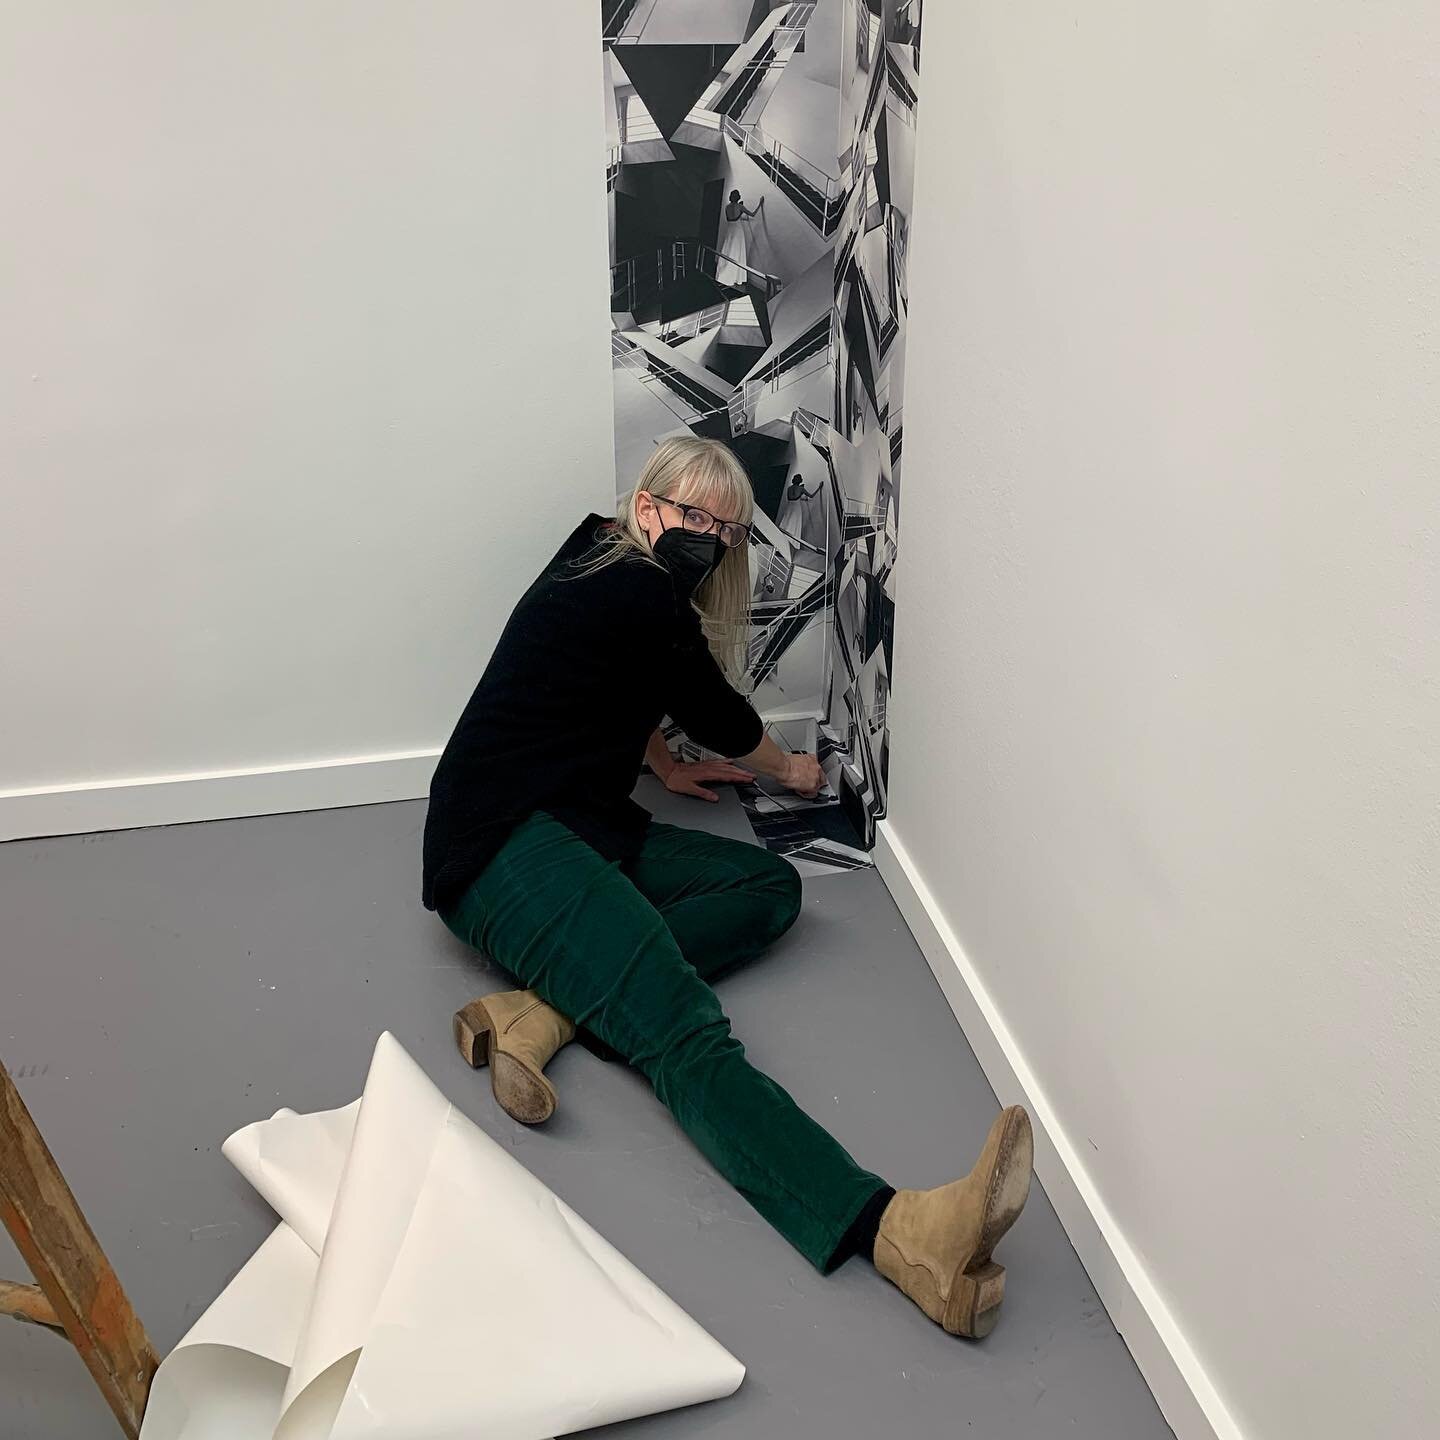 O_ Man! Installing LABYRINTH for a show opening this Friday from 6:00-9:00 @designmuseumchi 

@industryoftheordinary (Adam Brooks and Mathew Wilson) were formed in 2003. They have spent the nearly two decades since creating works in Chicago and beyon